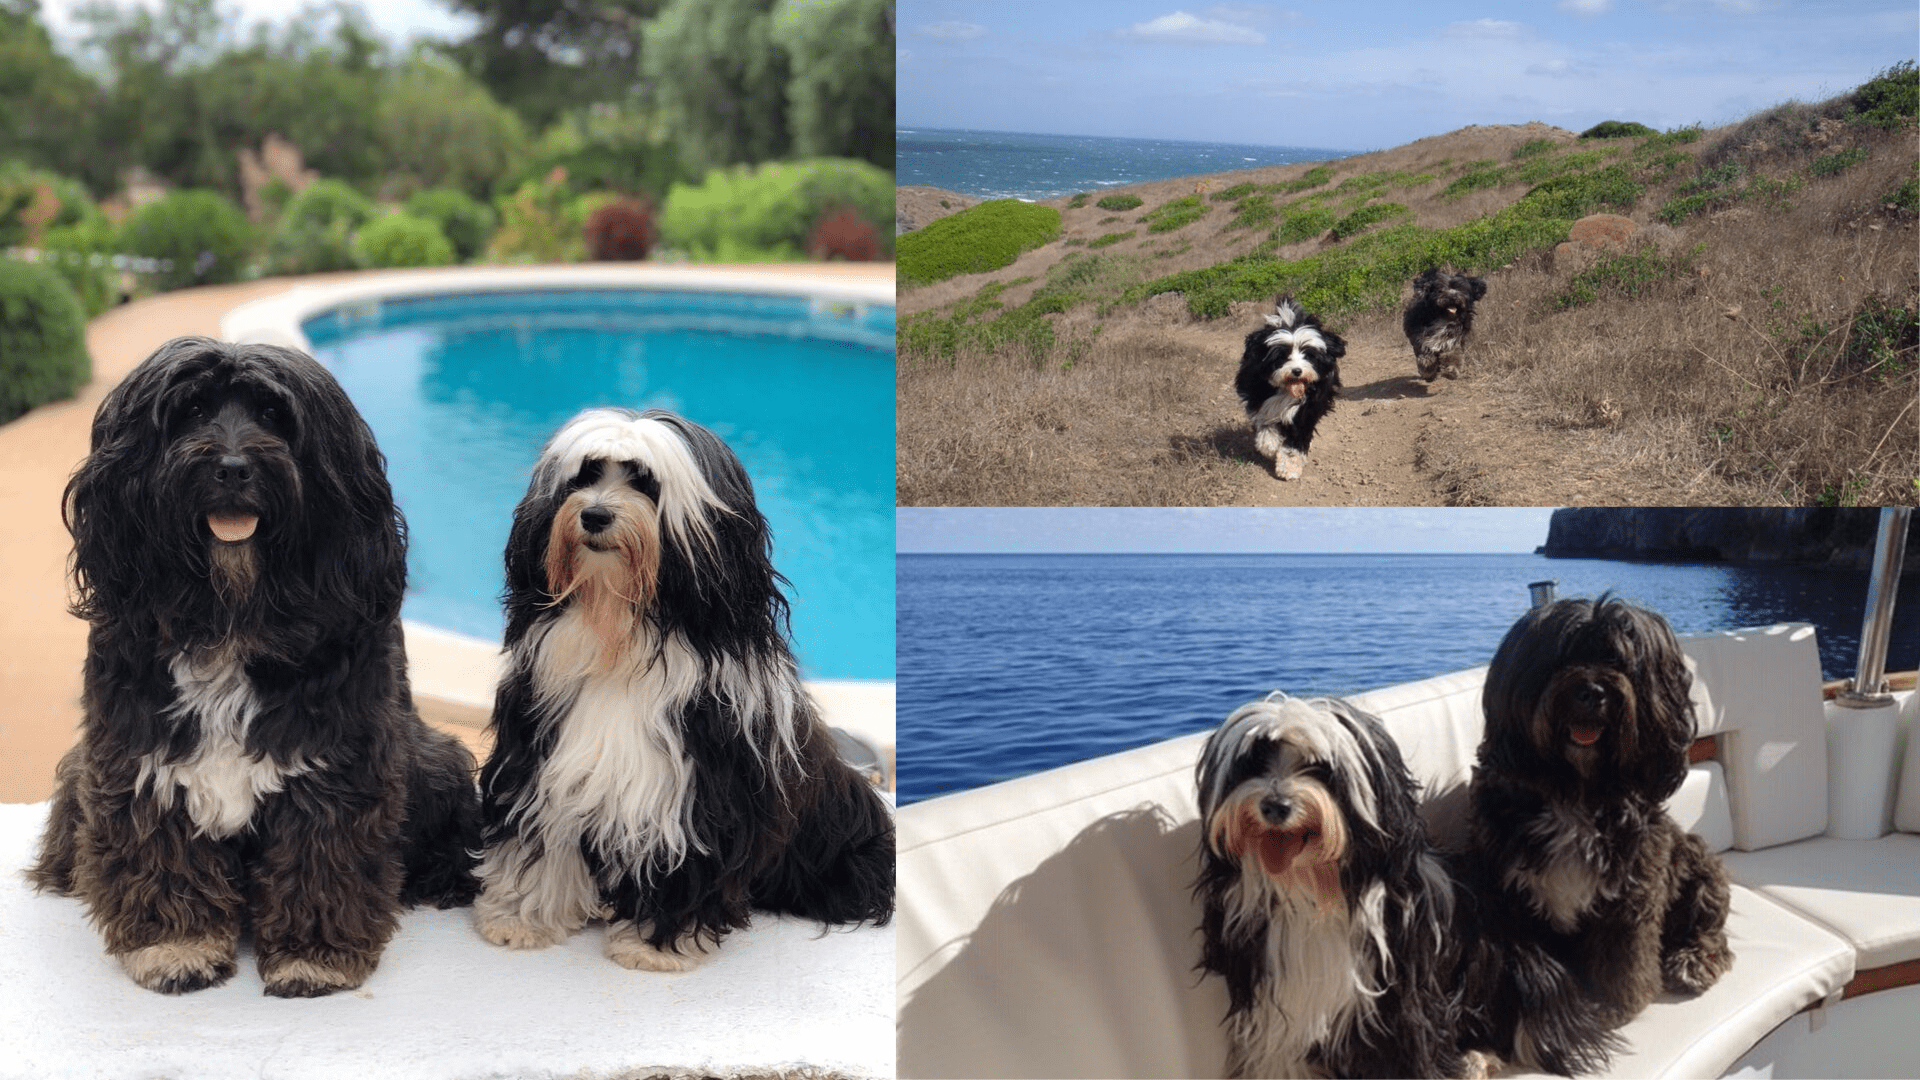 The dogs enjoying their time in Menorca